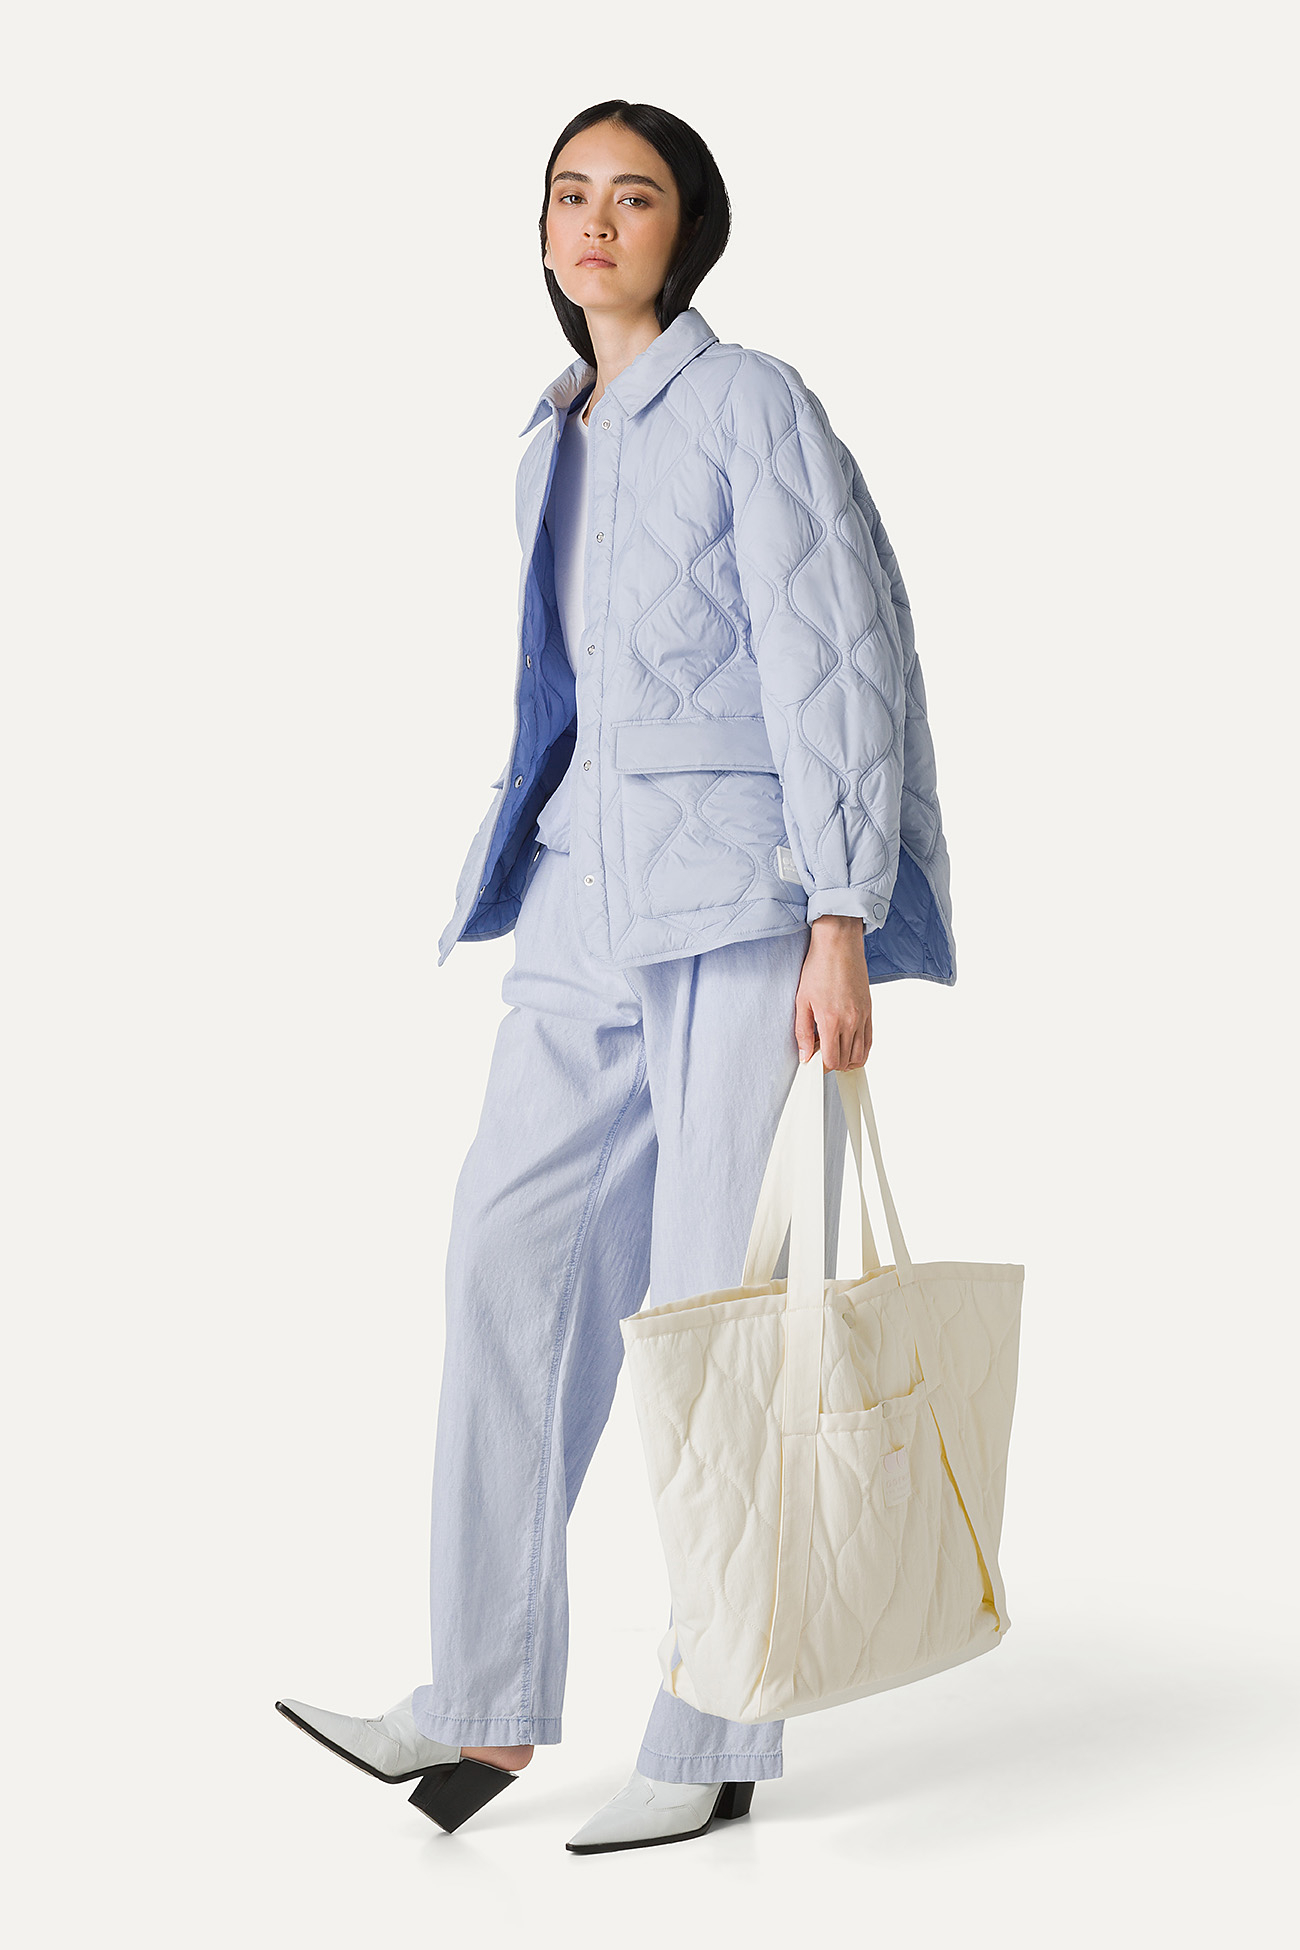 OVERSIZE JACKET IN QUILTED LIGHT NYLON 9222 - SKY BLUE - OOF WEAR